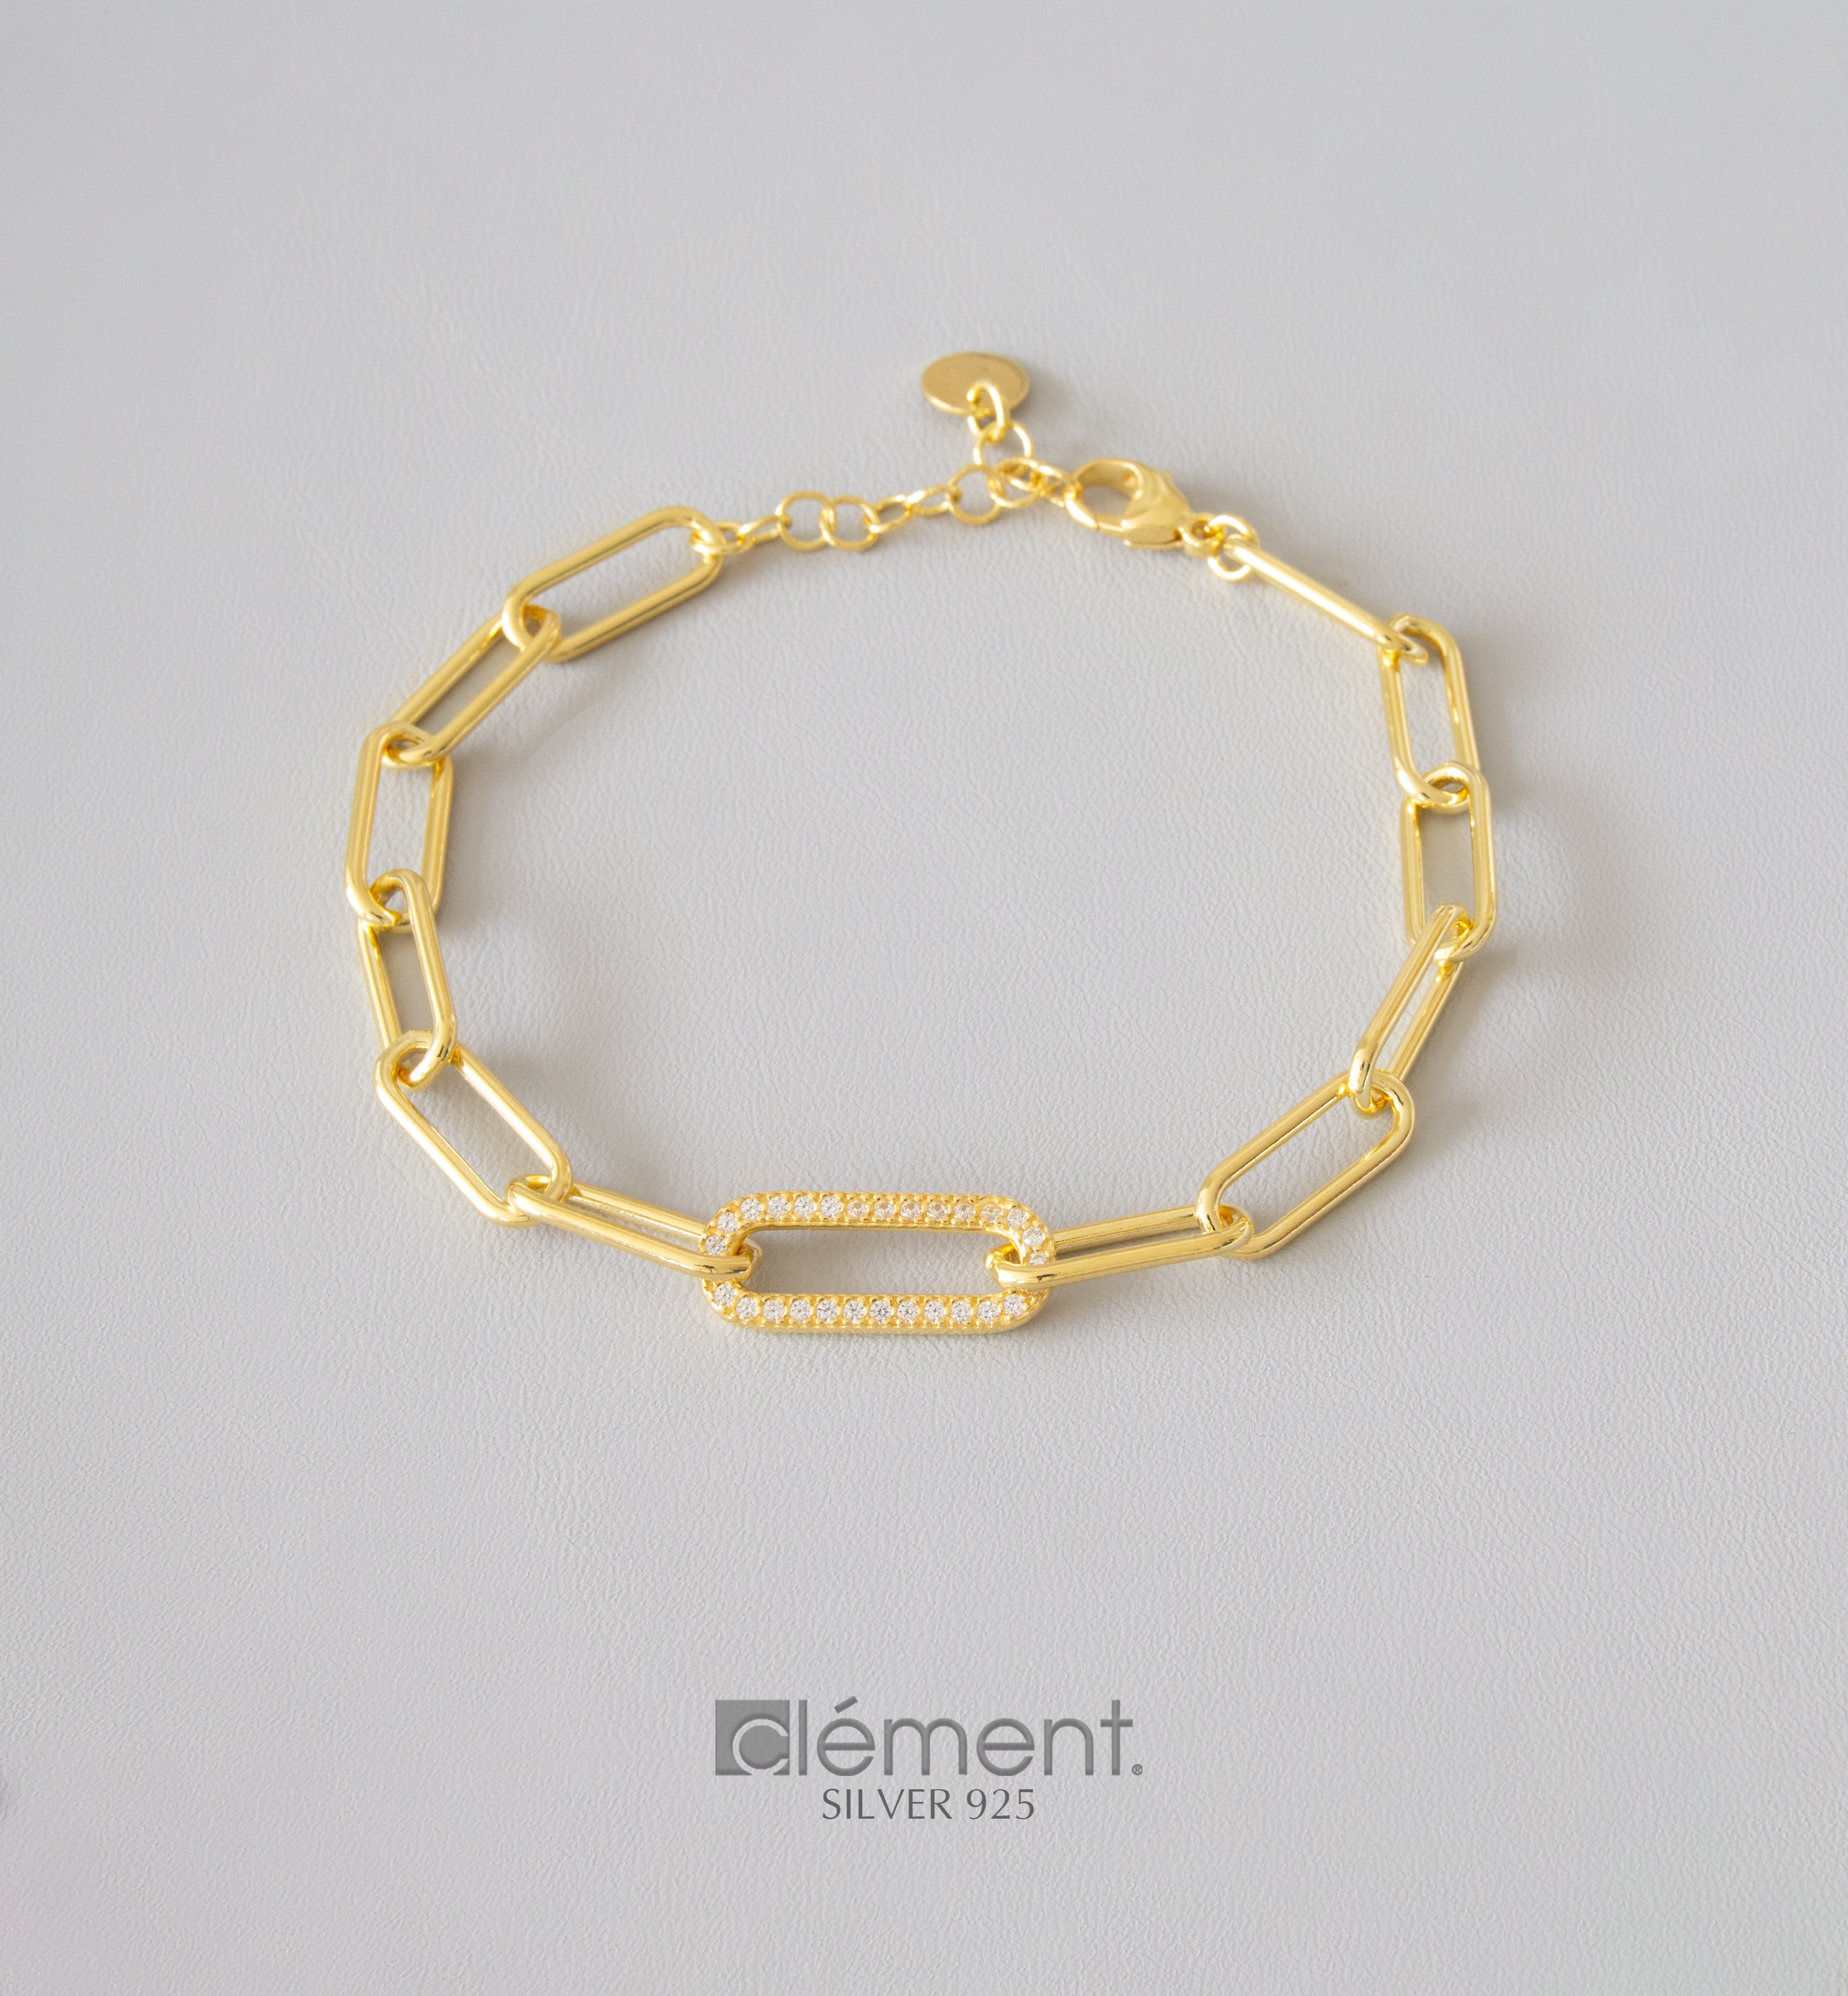 Silver 925 Yellow Gold Plated Link Bracelet with CZ Stones